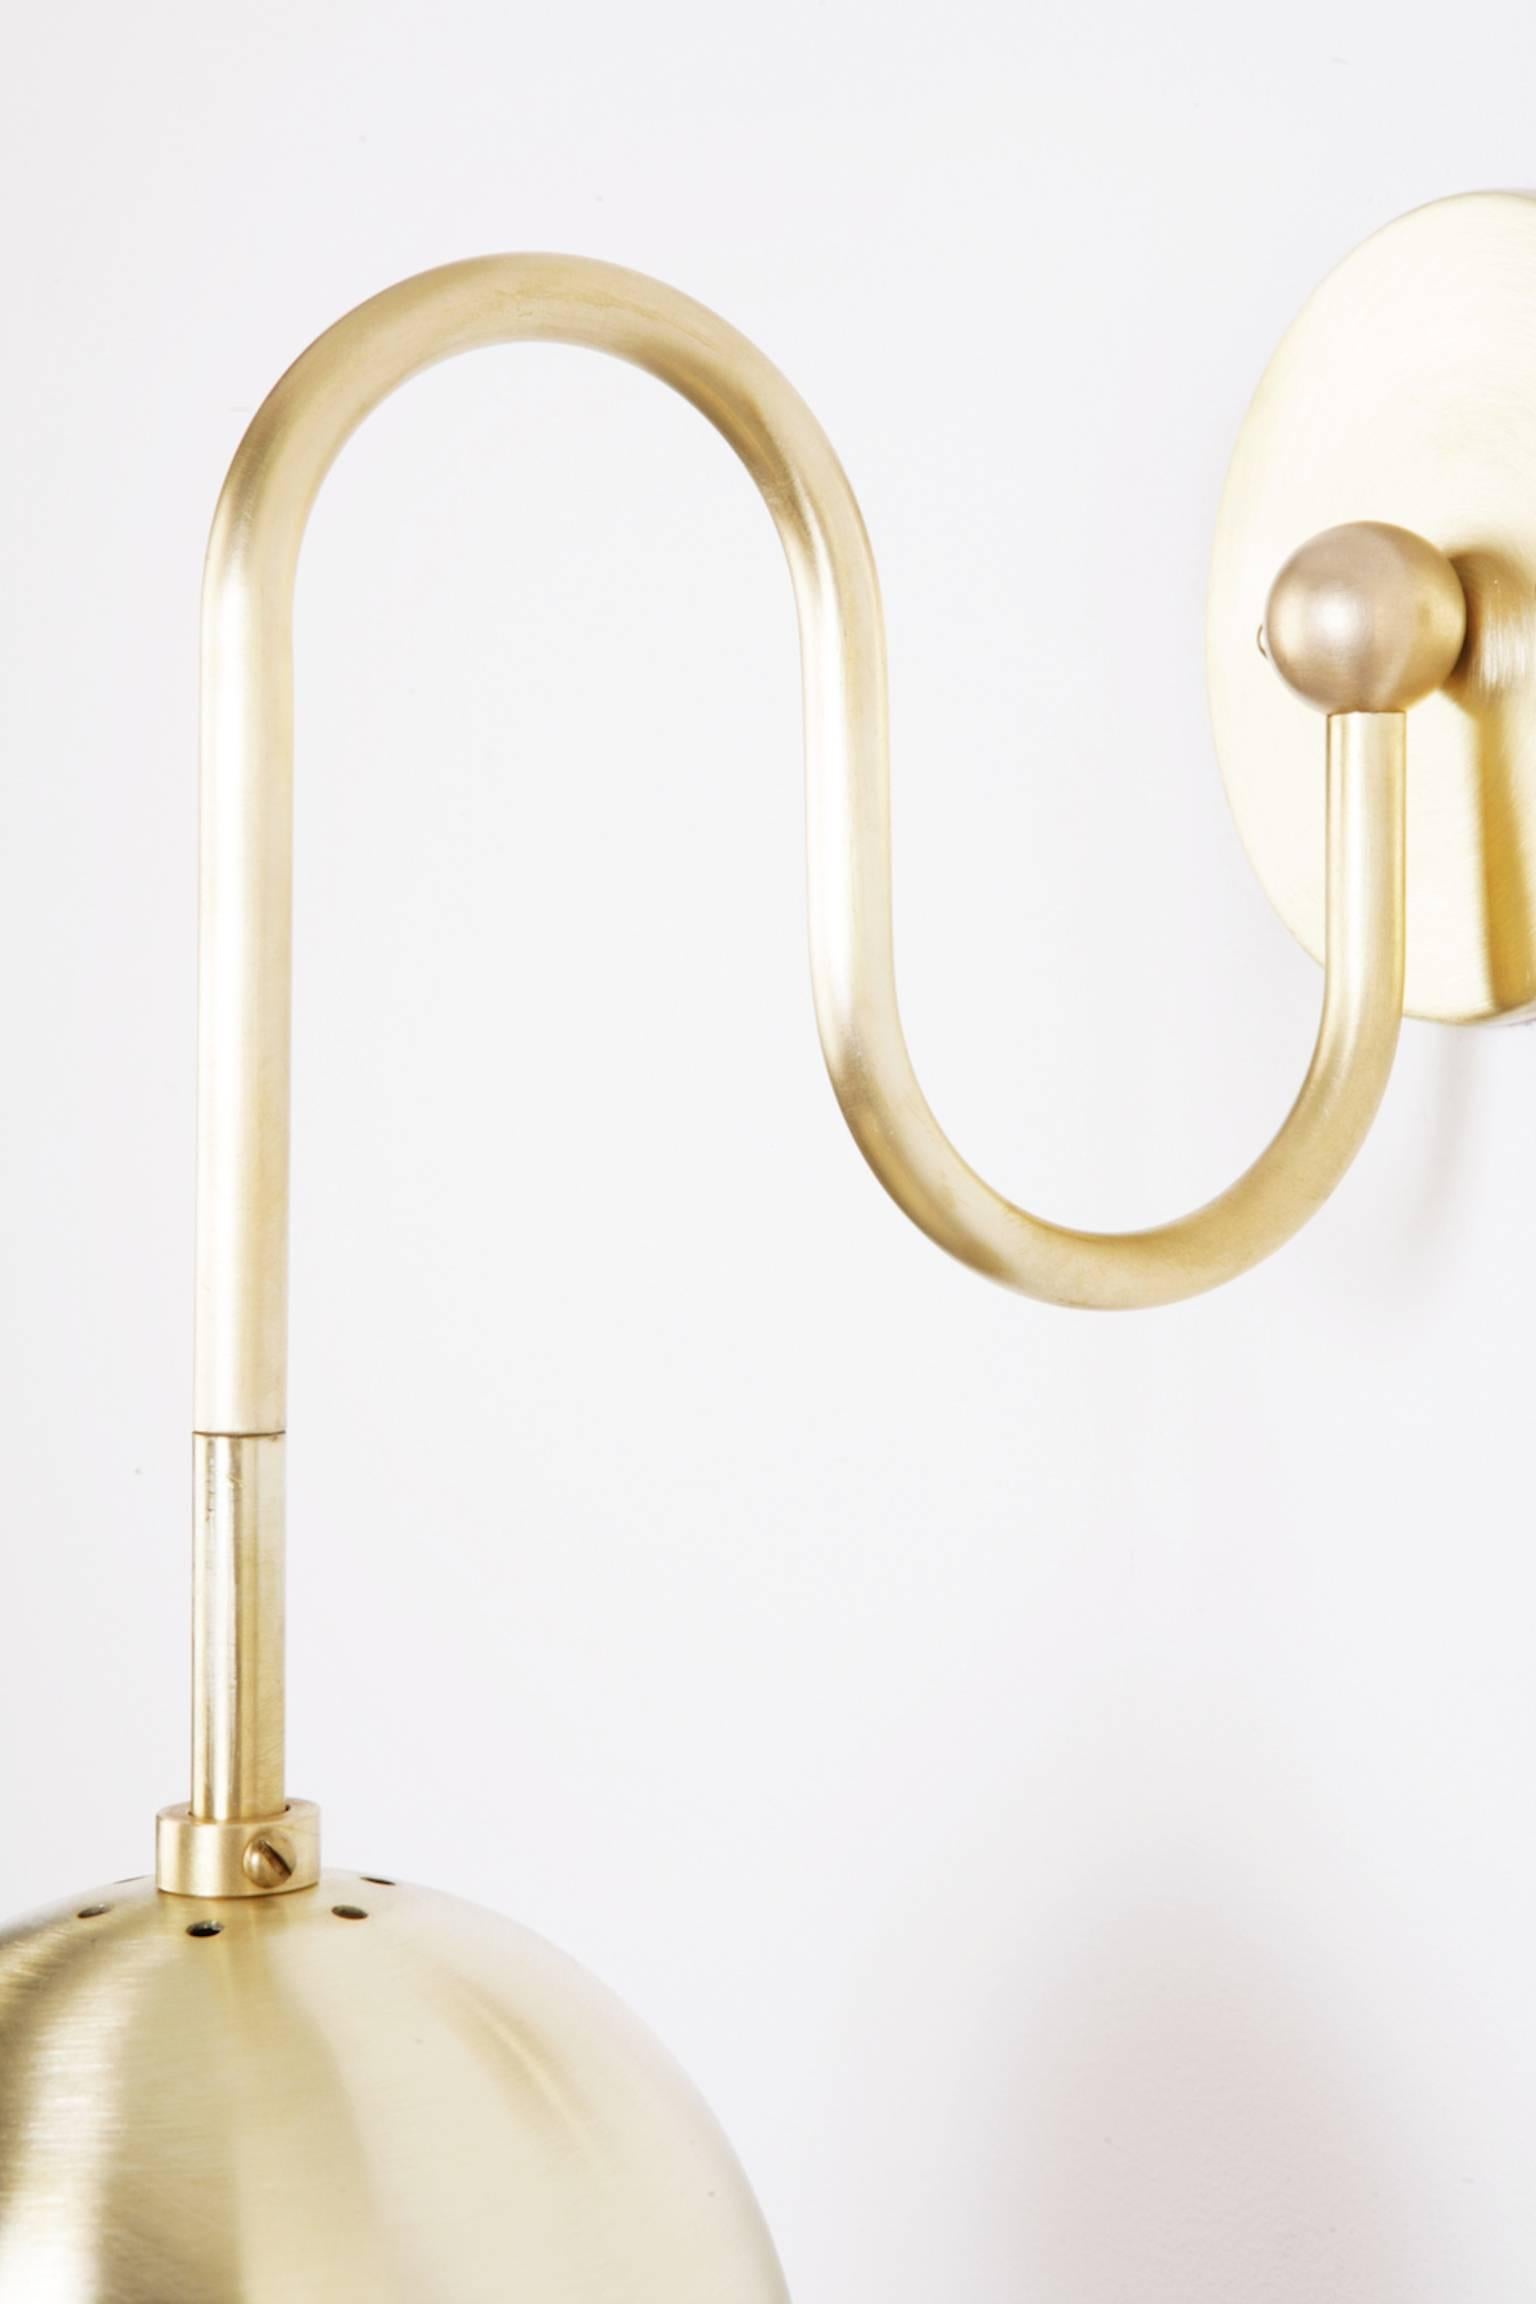 American Balise Sconce in Brass Finish with Brass Details and Opal Glass Globe